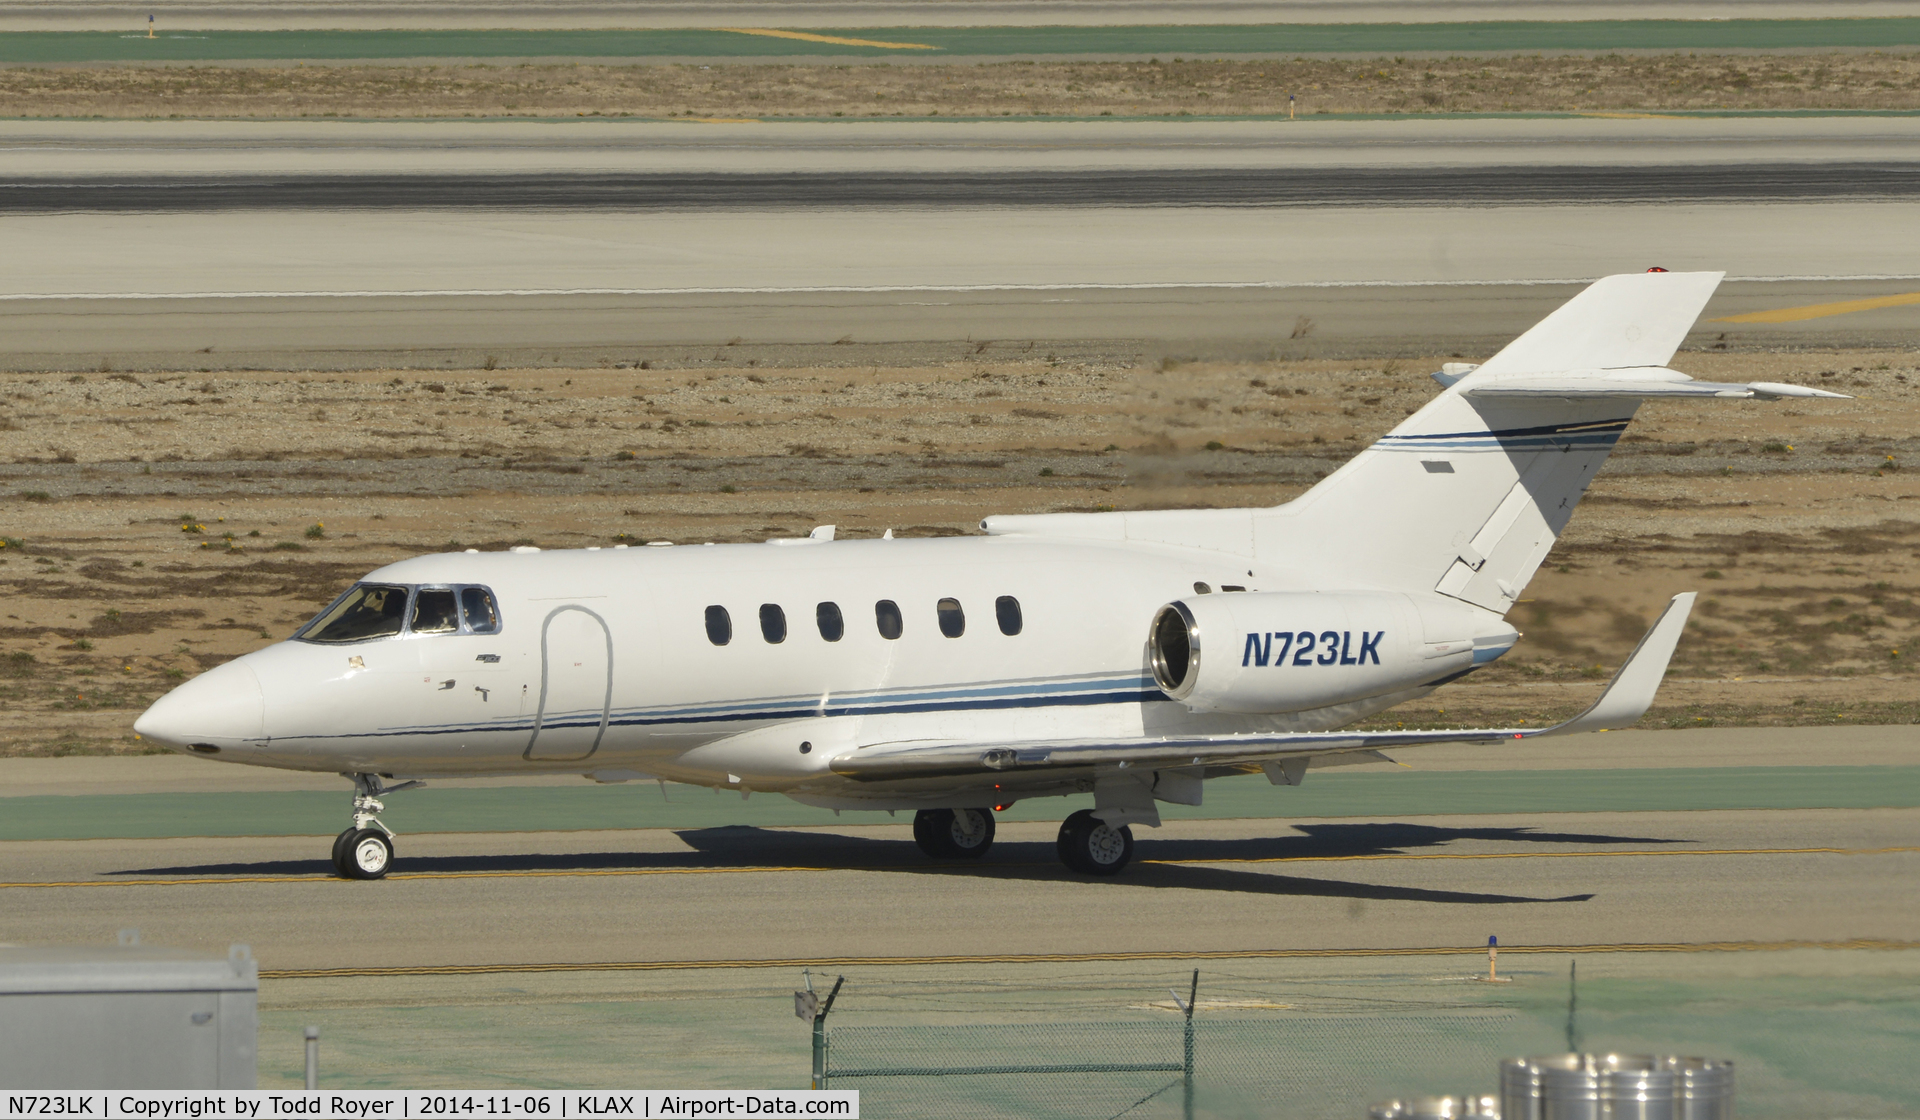 N723LK, 1989 British Aerospace BAe.125 Series 800A C/N 258155, Taxiing for departure at LAX